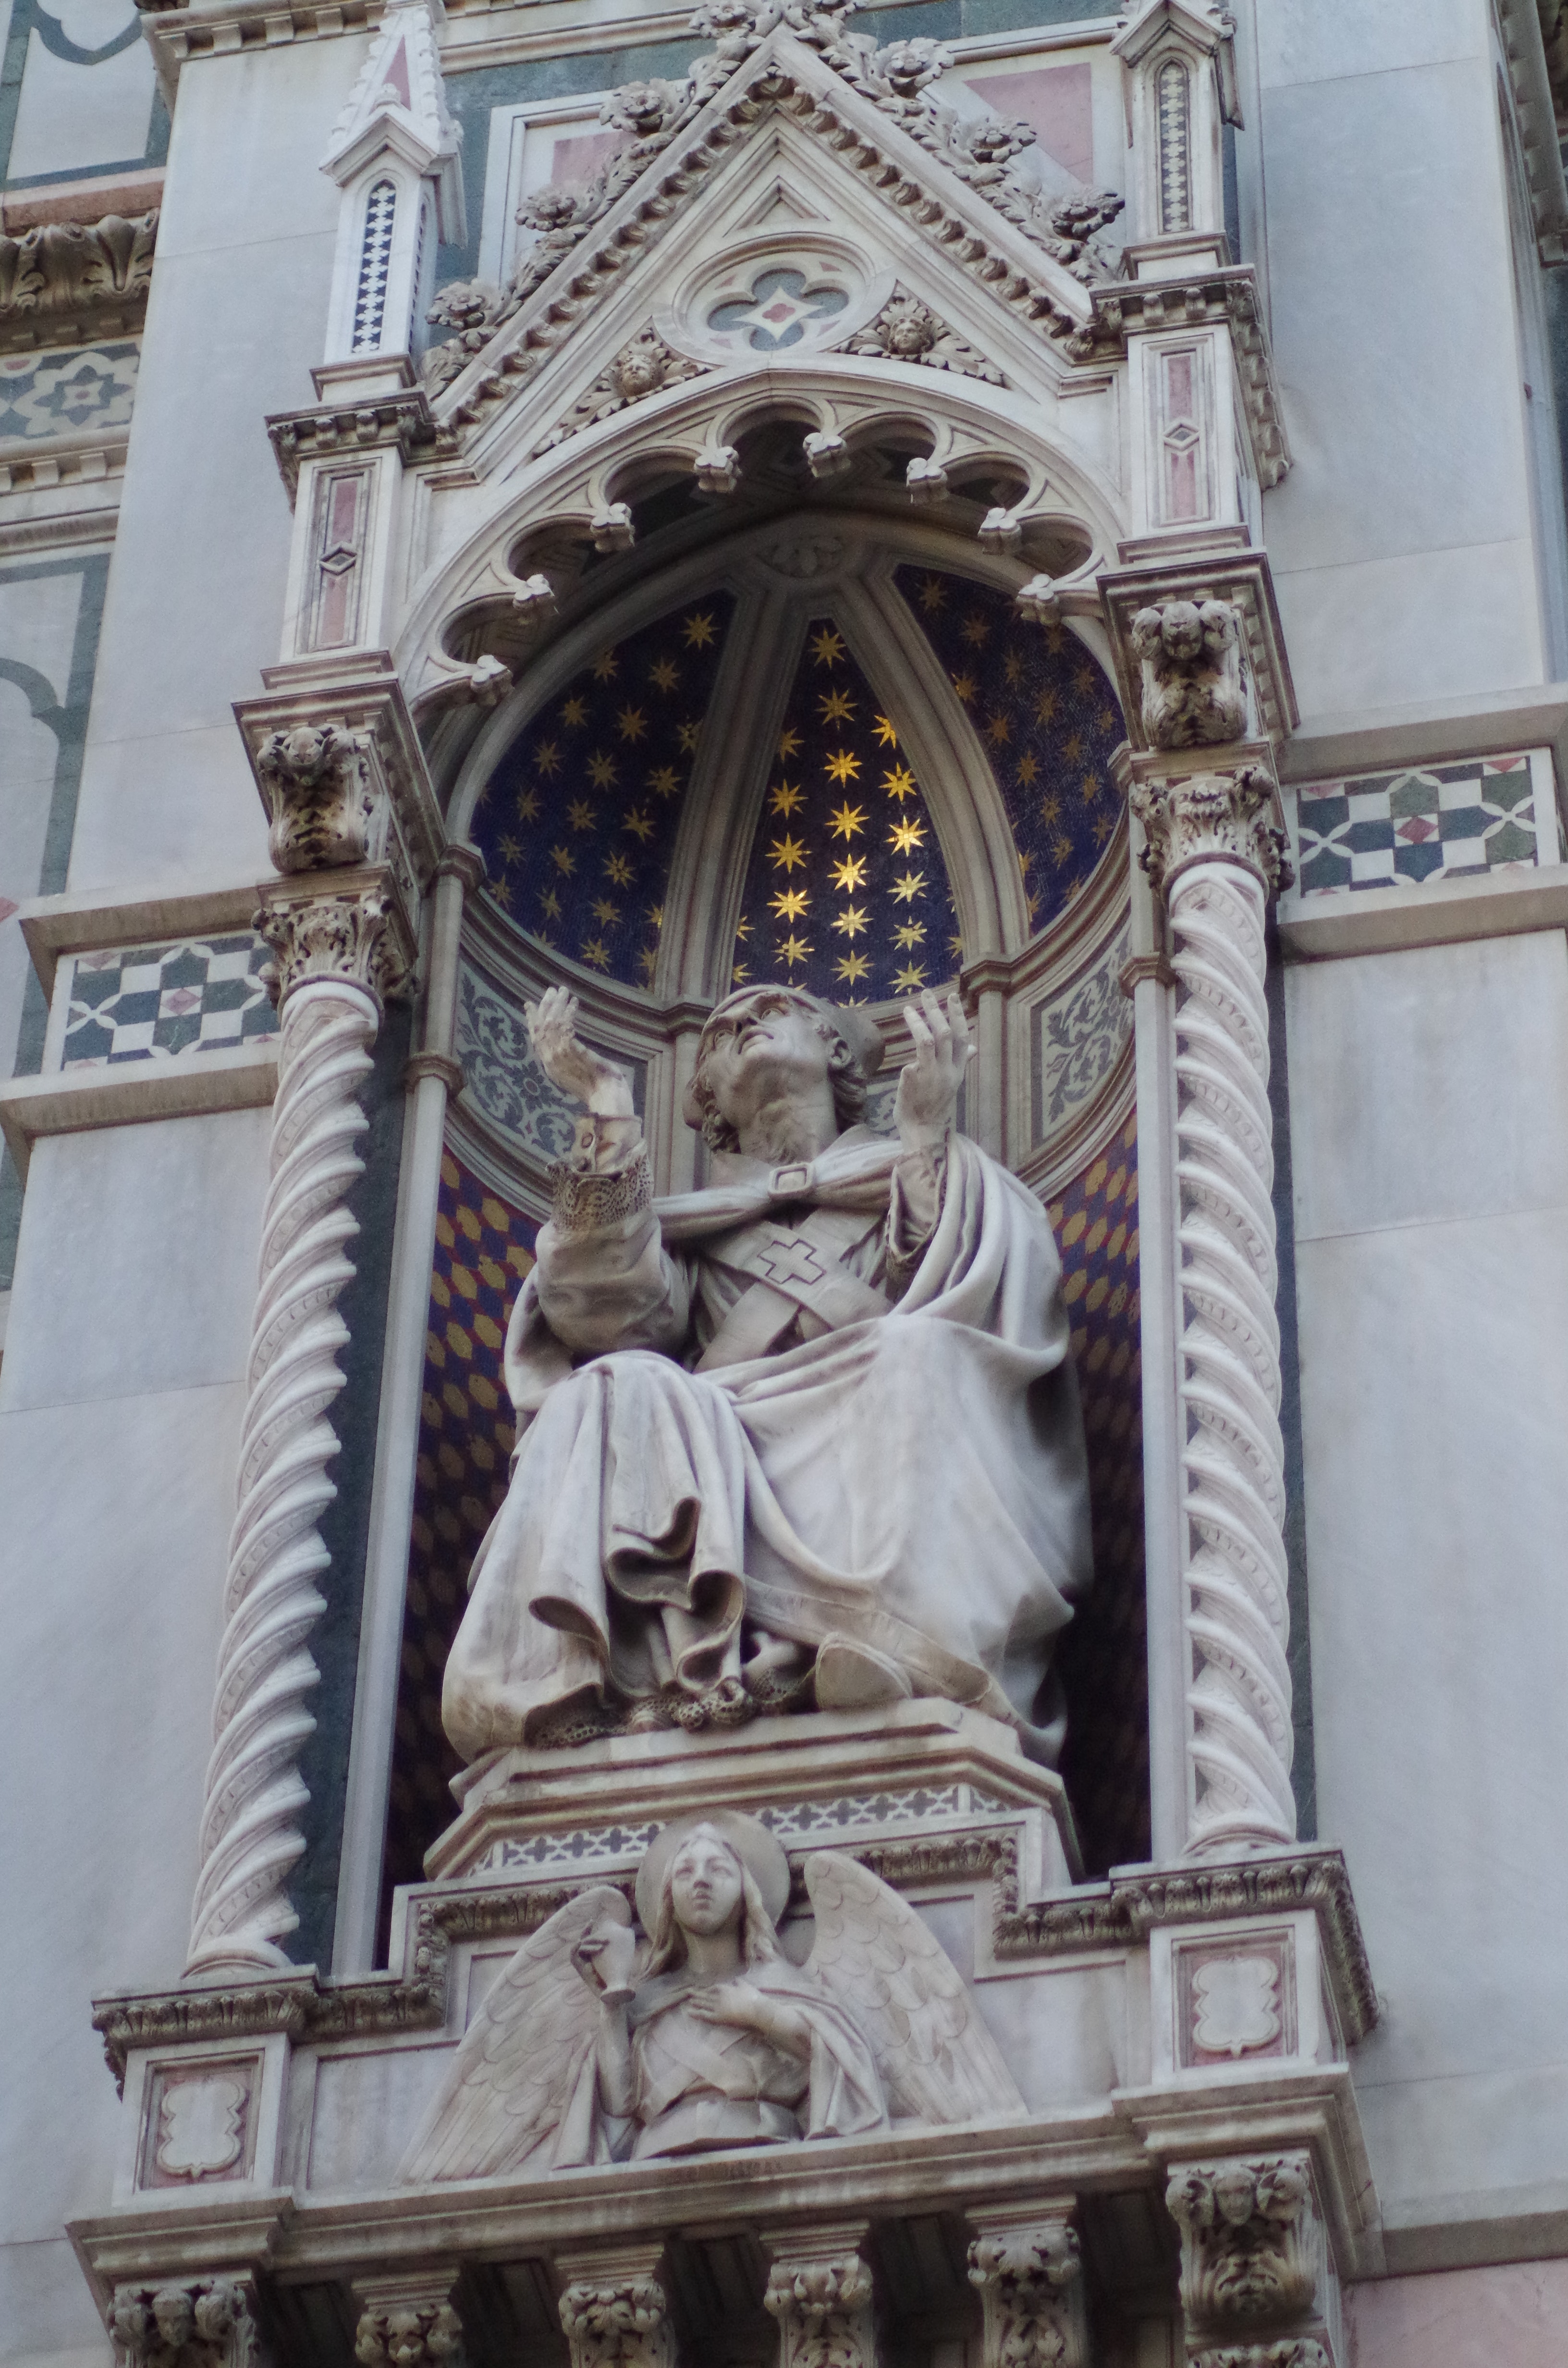 Ornate statue of person in robes photo